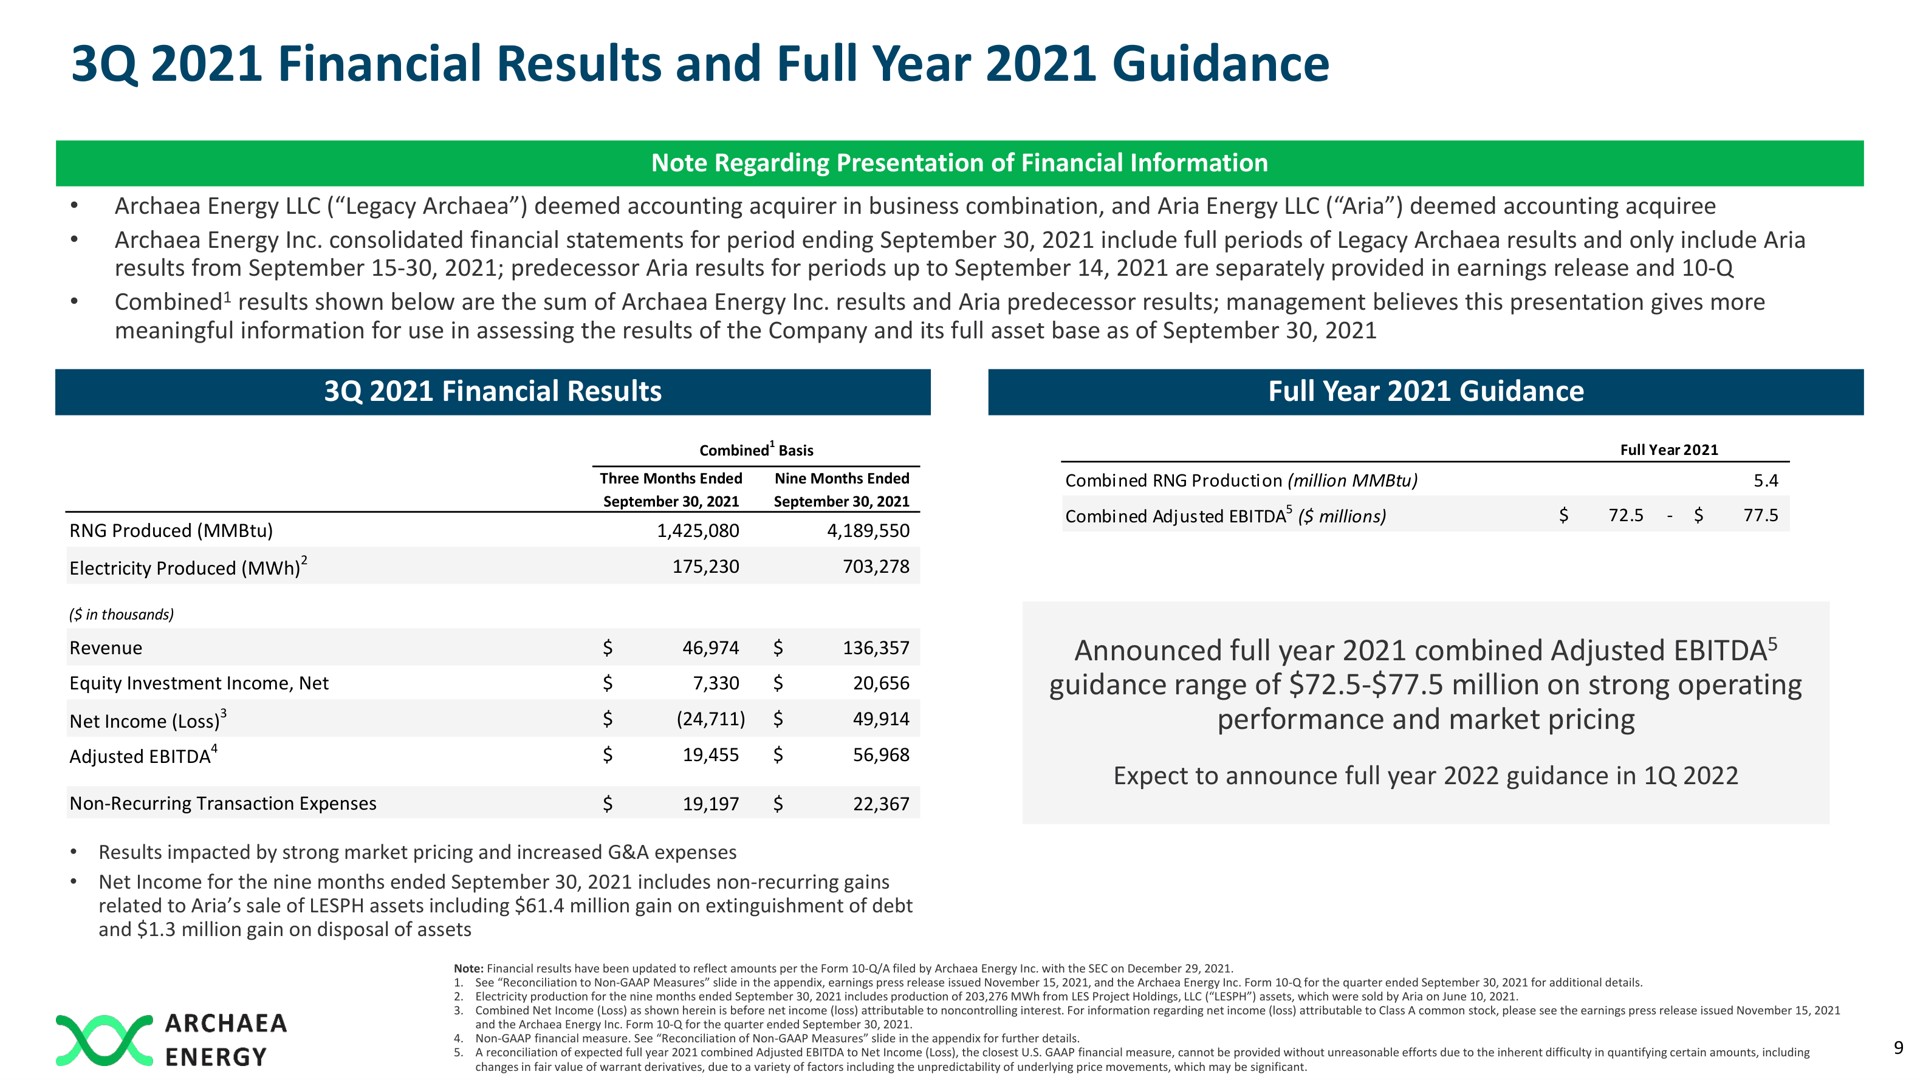 financial results and full year guidance | Archaea Energy